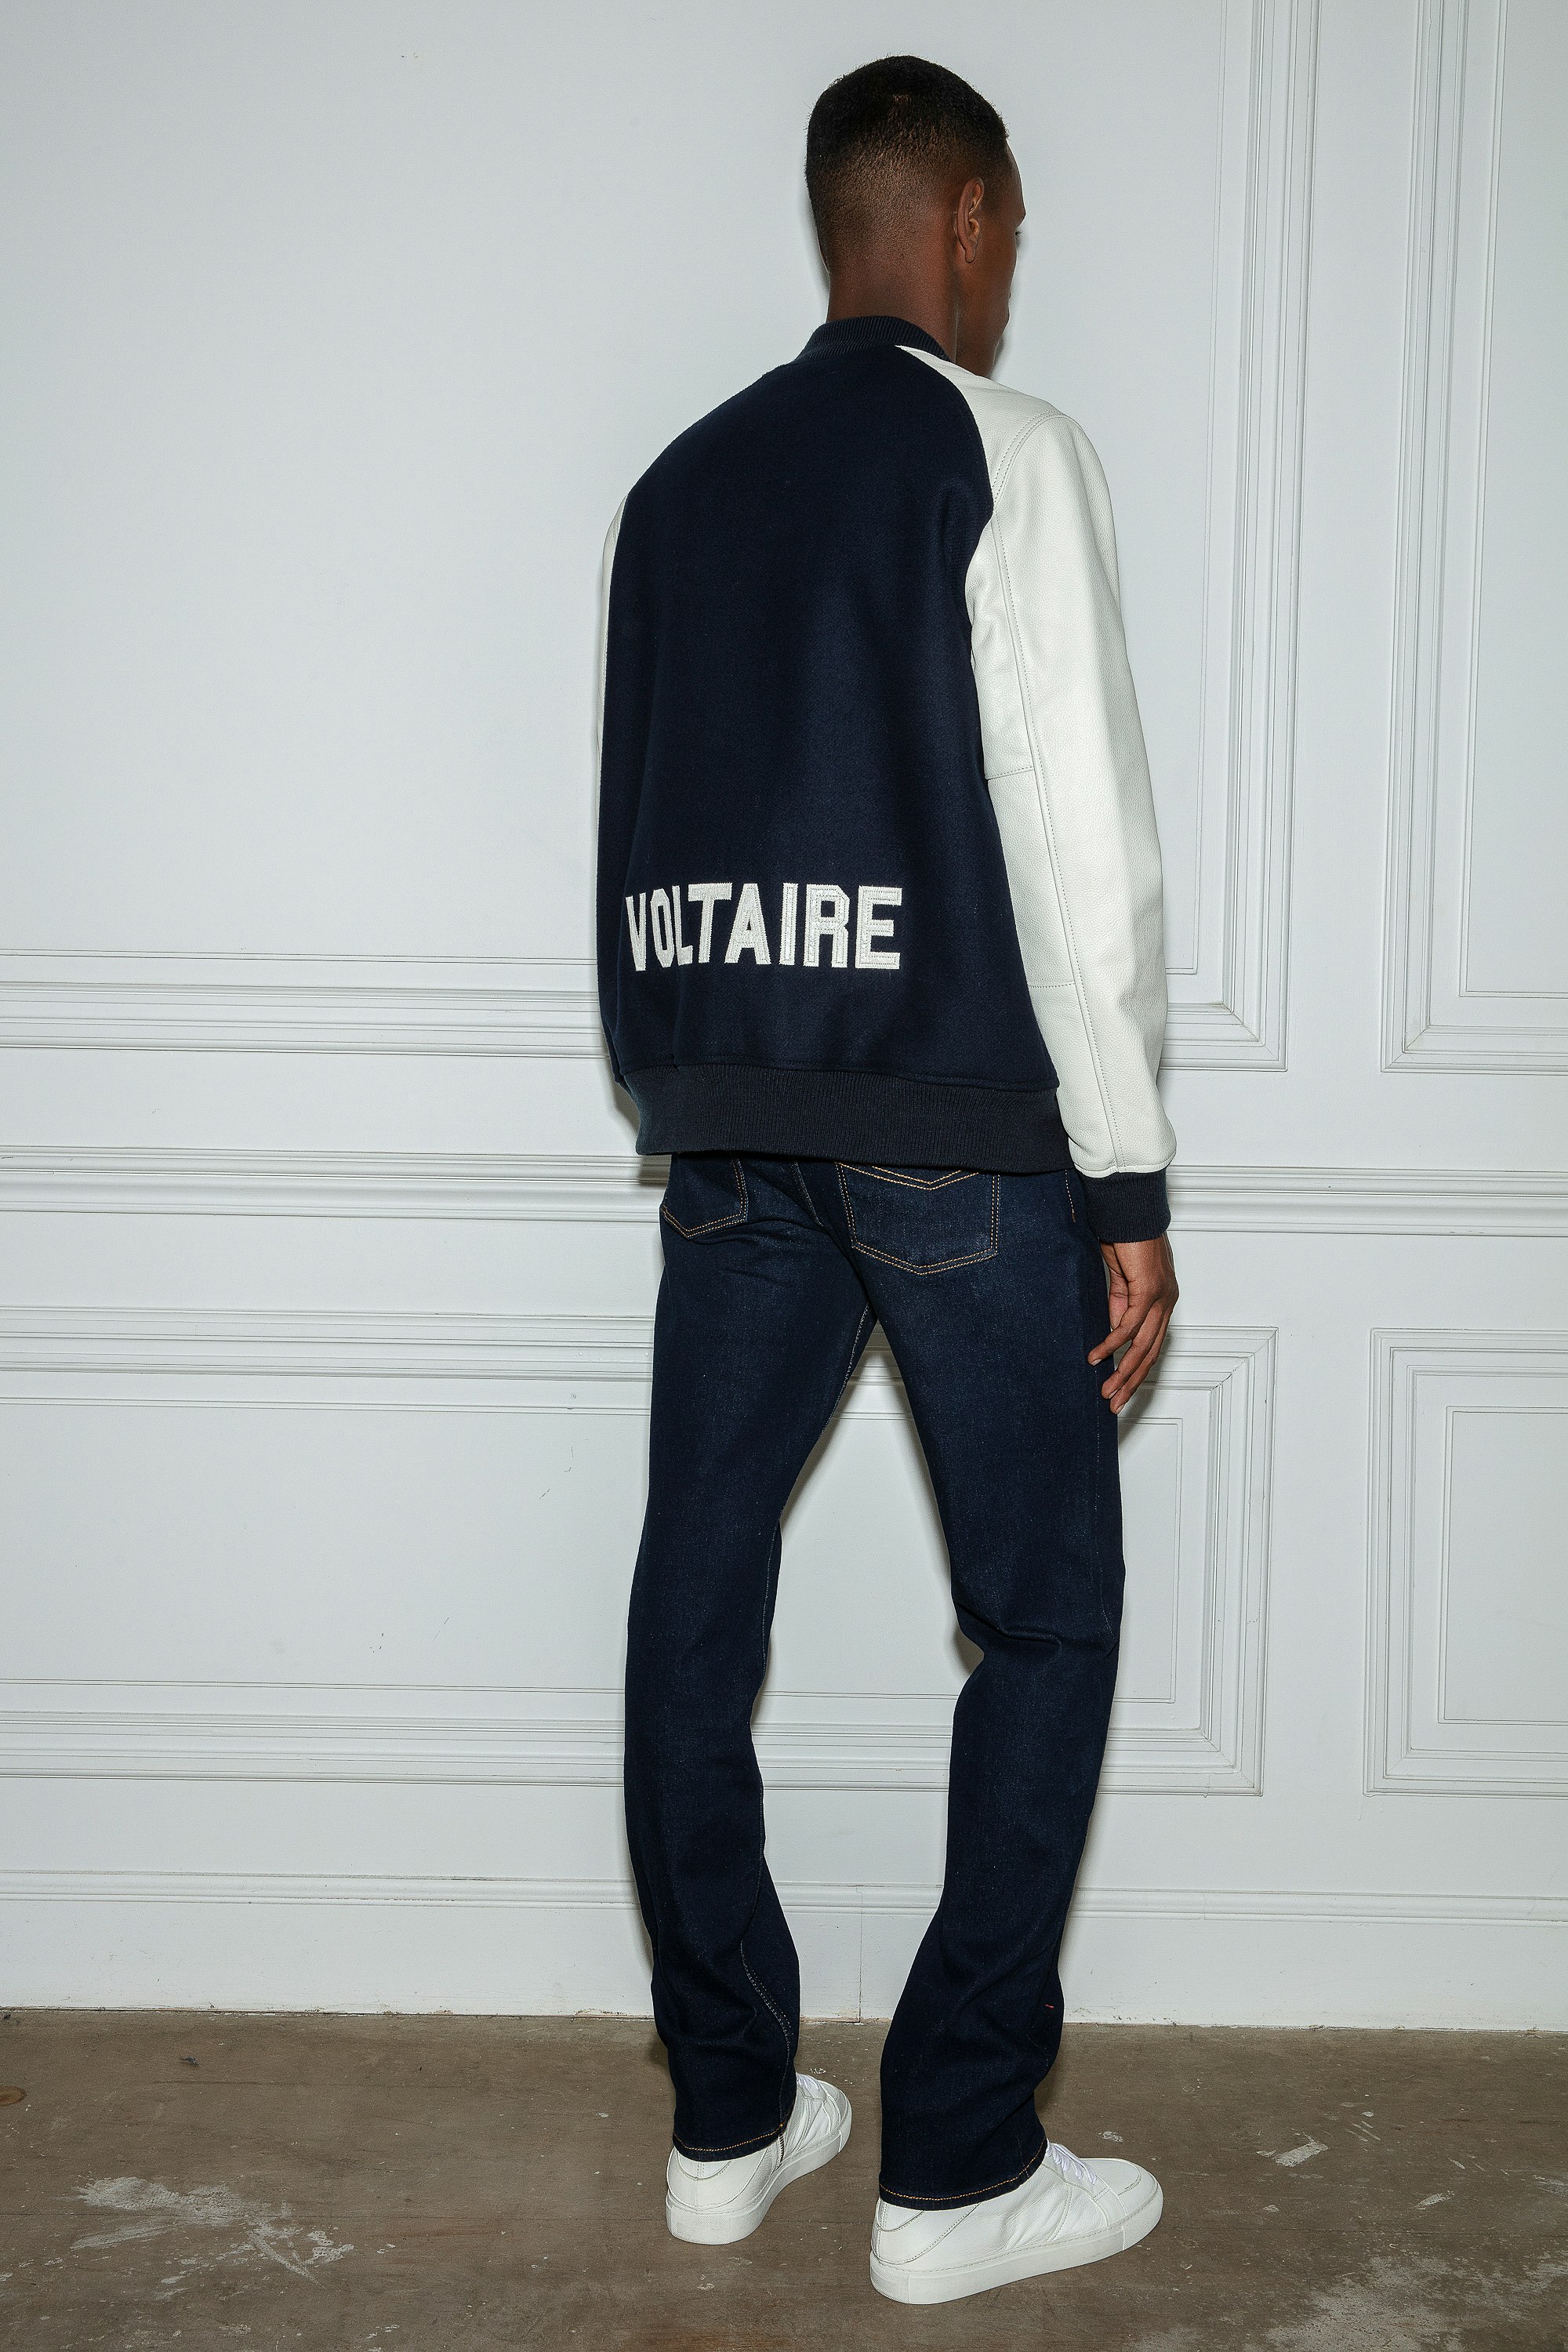 Birdieh ジャケット Men's navy blue and white wool and leather jacket 